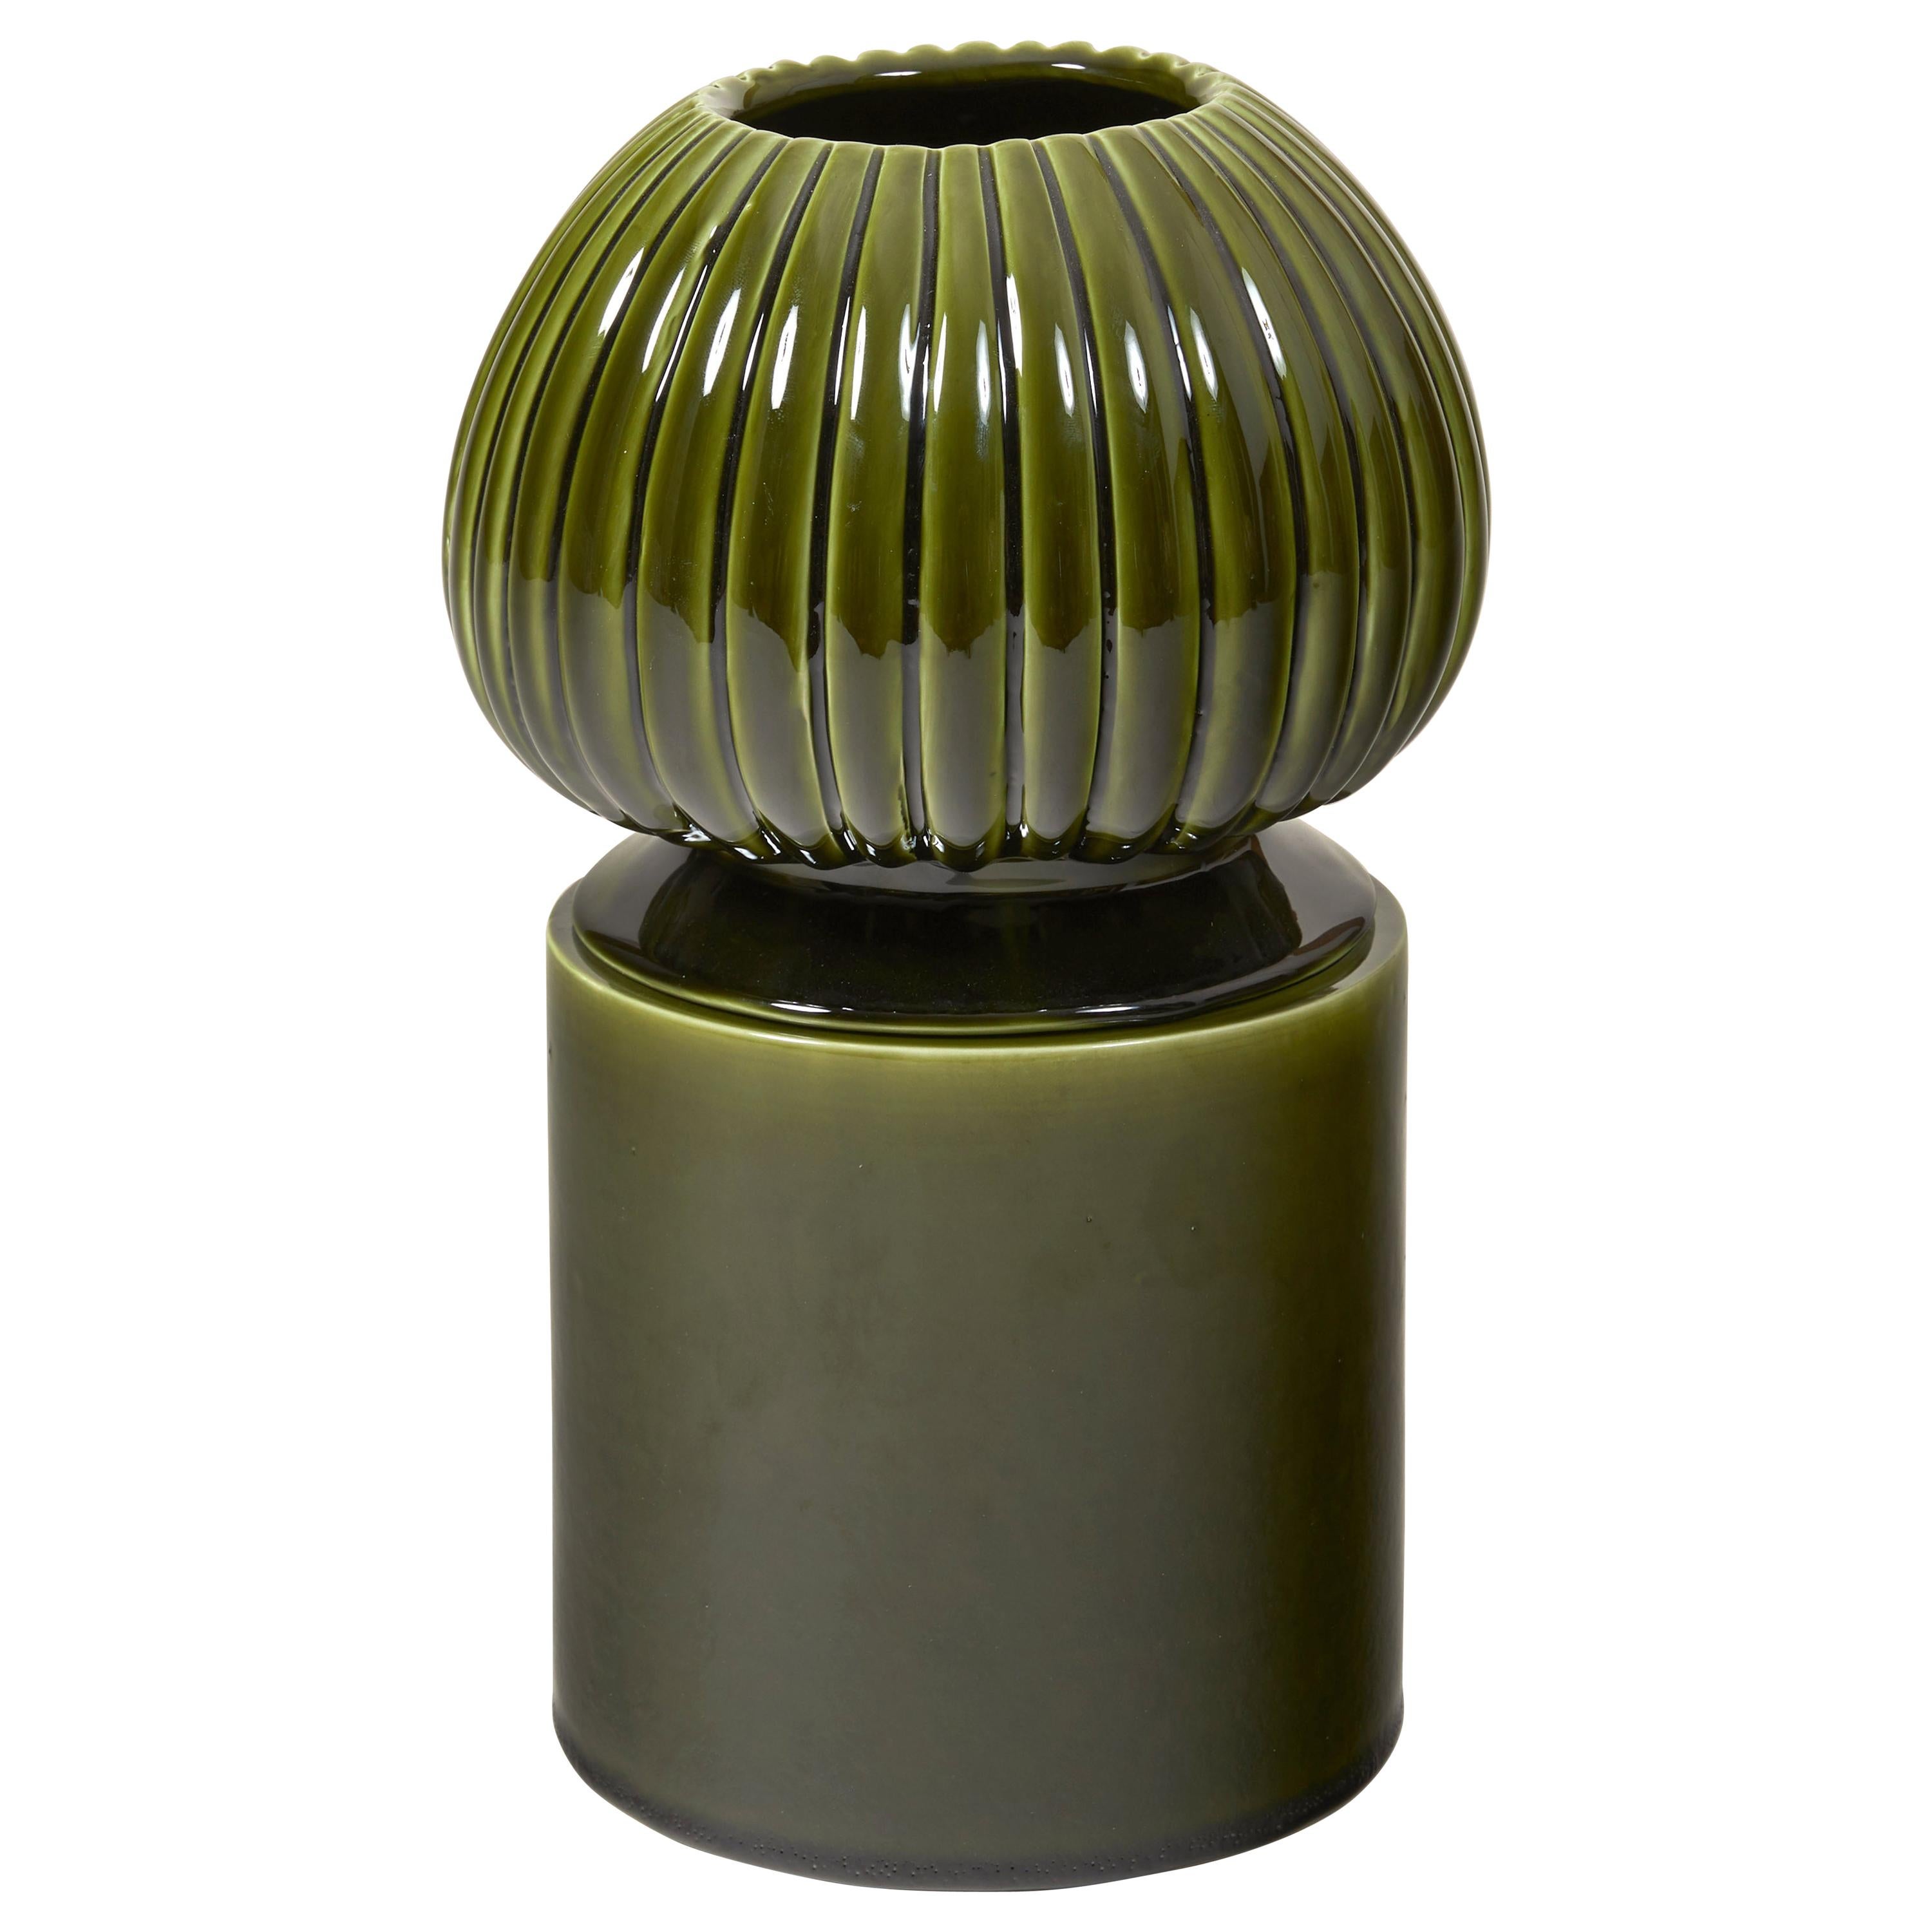 Glazed Green Large Ceramic Candleholder with Sculpted Lid by Laura Gonzalez